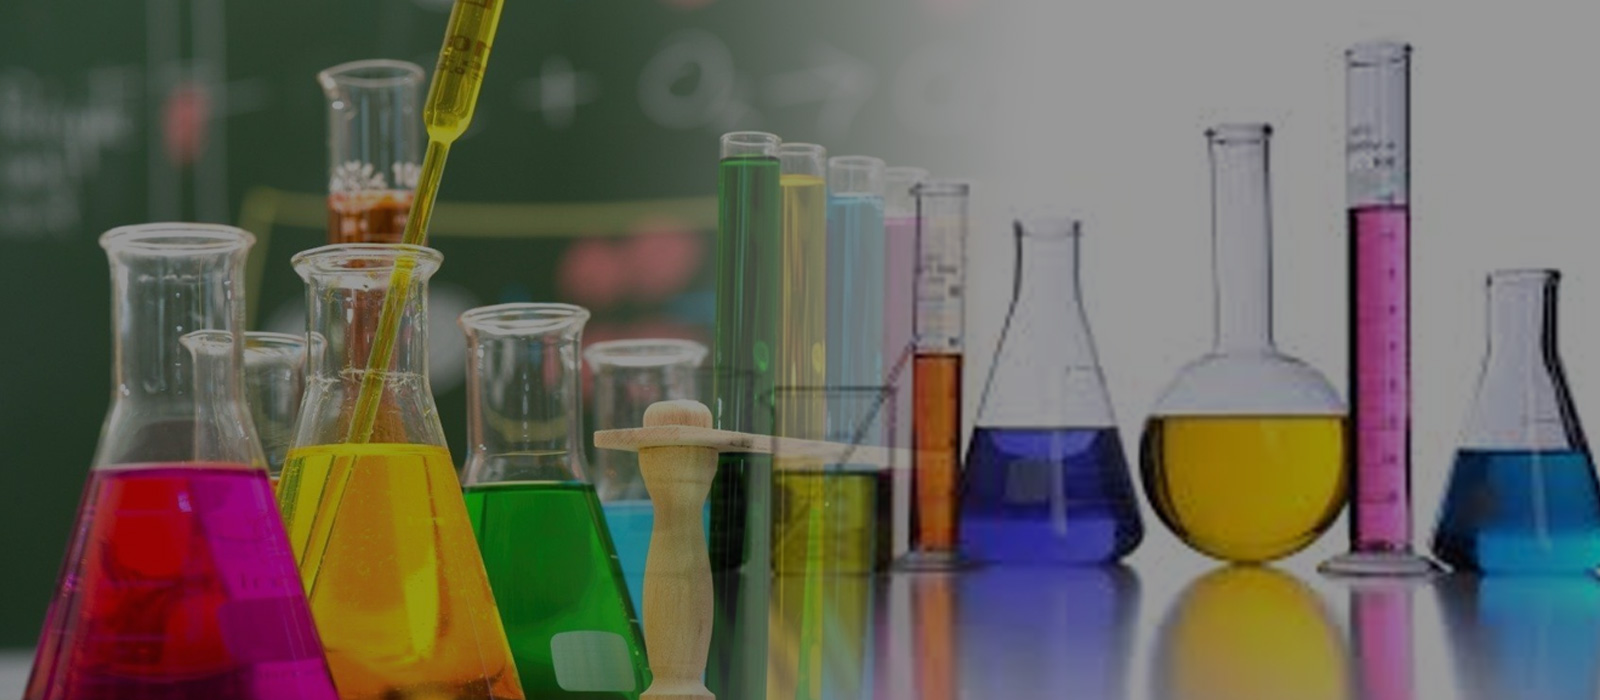 Dyes Intermediates & Speciality Chemicals